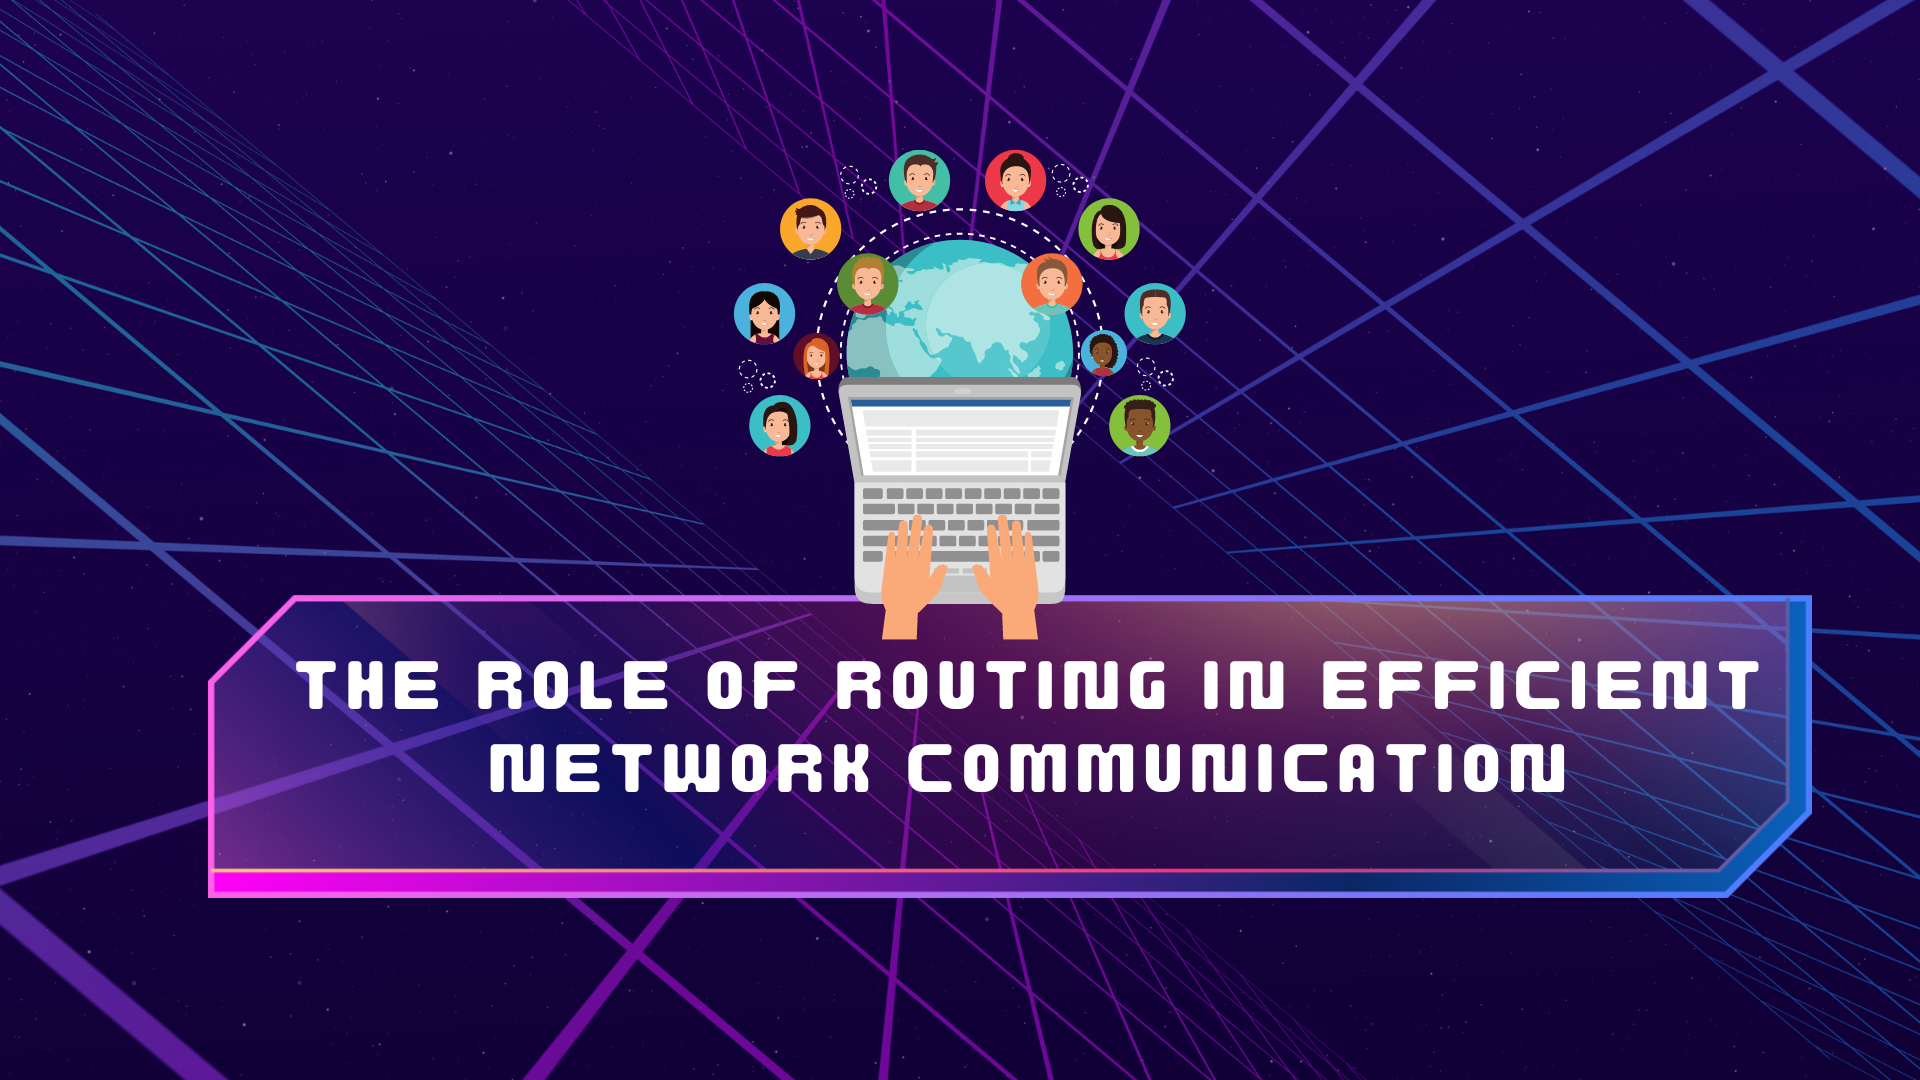 The Role of Routing in Efficient Network Communication